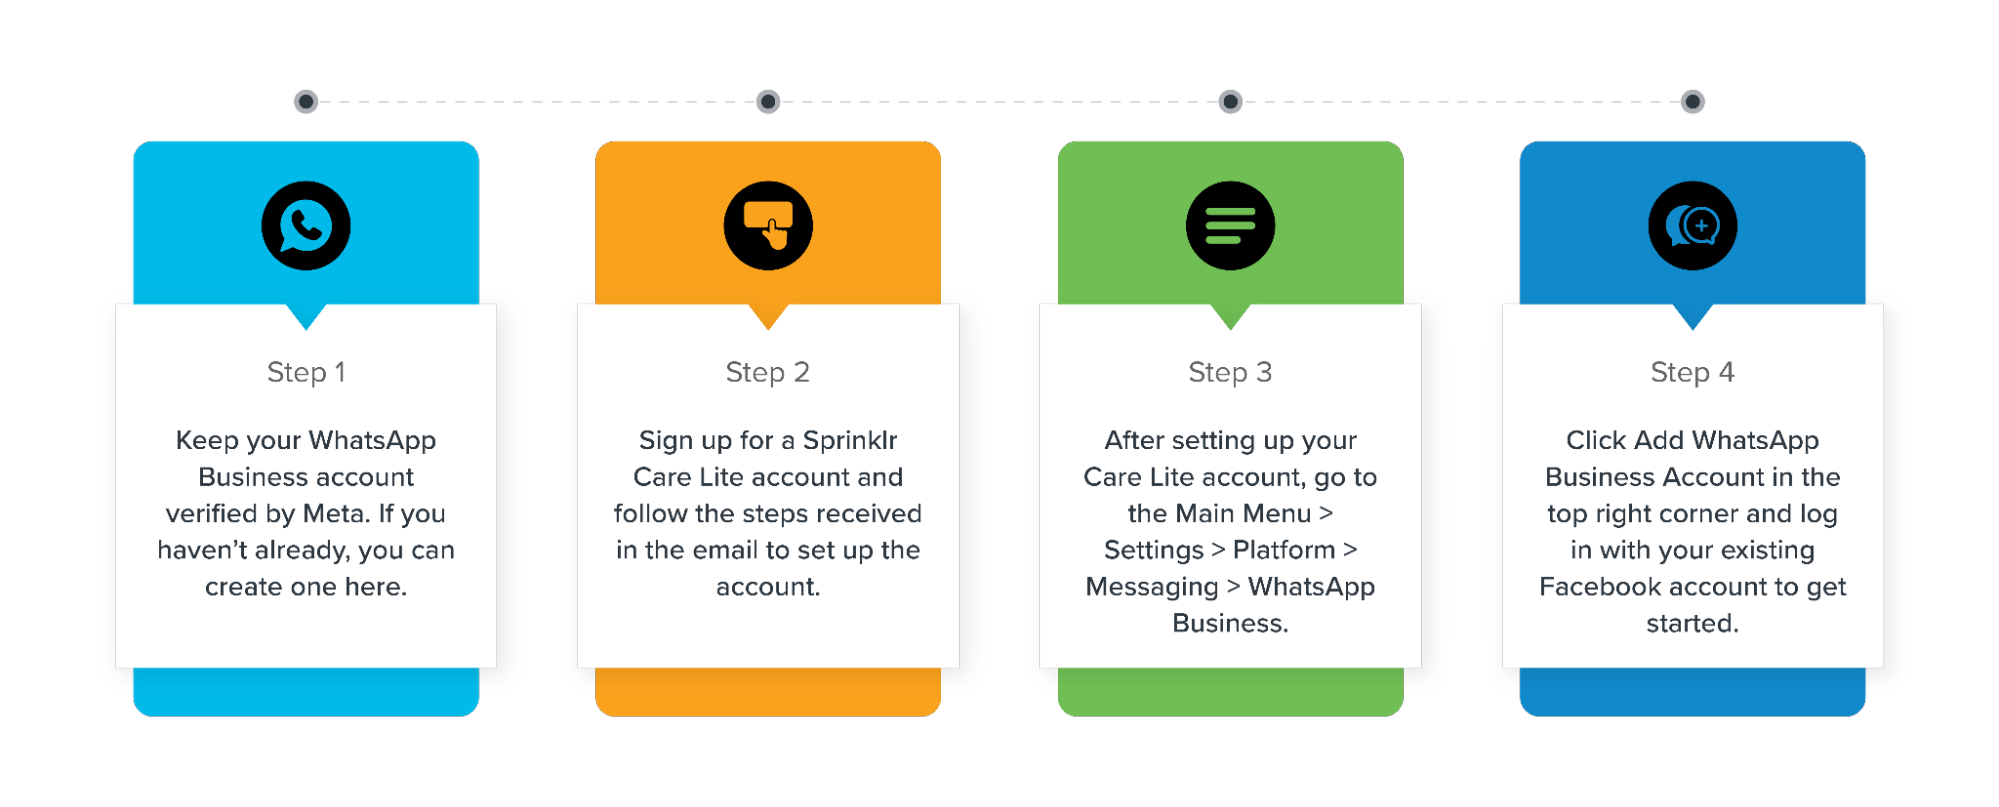 An image showing the 4 simple steps to integrate your Whatsapp Business account with Sprinklr Service